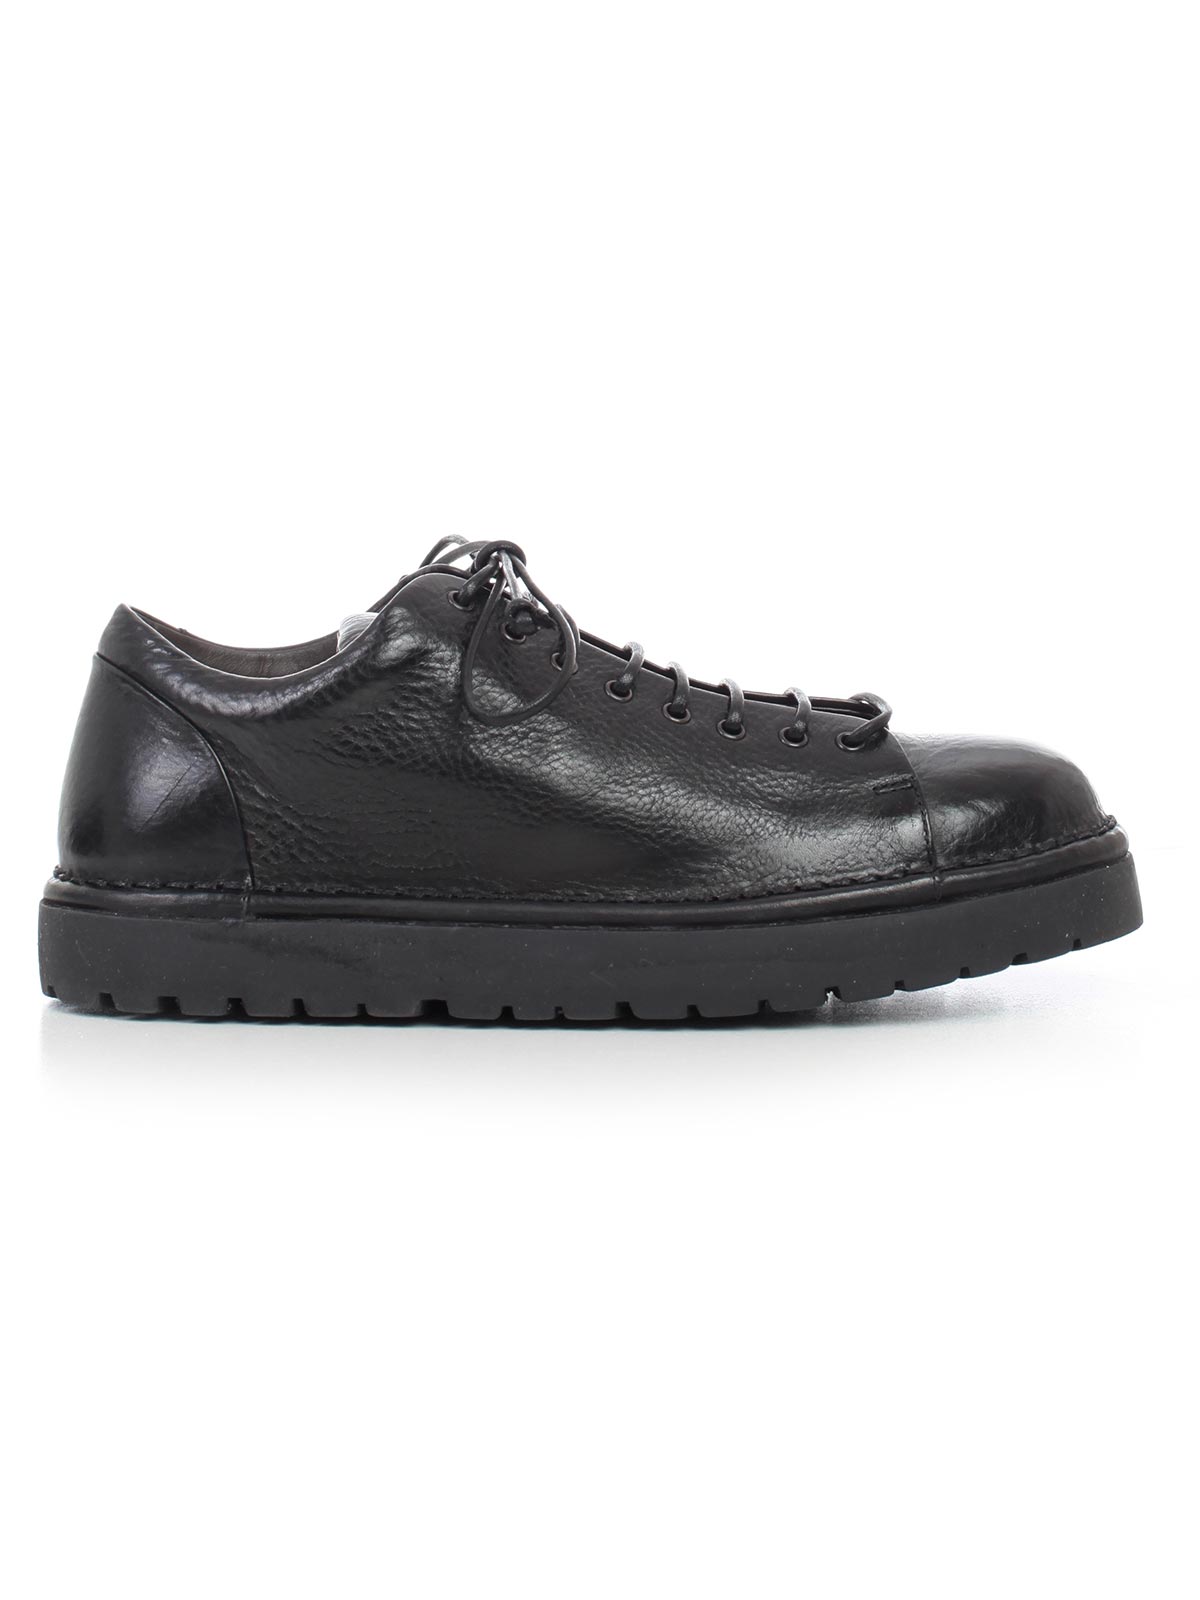 Marsell Shoes MWG350.6766 - NERO.Bernardelli Store - Online fashion store  for Men and Women